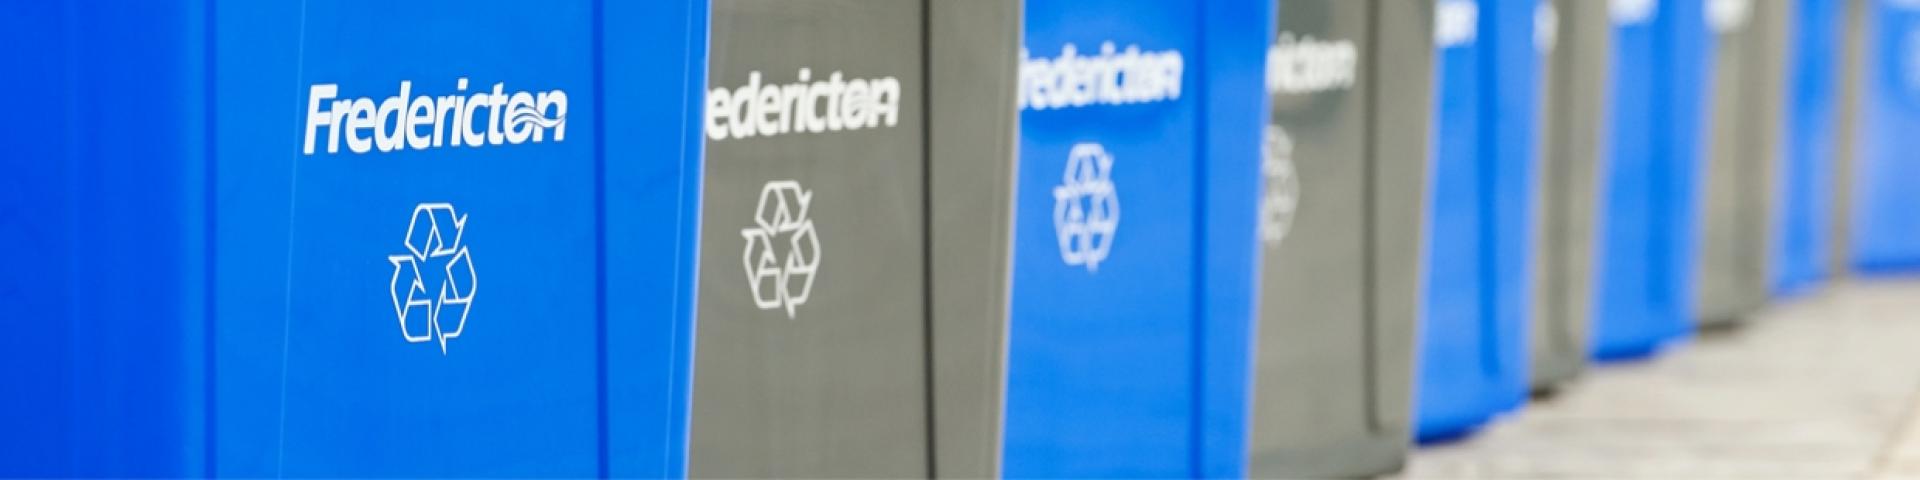 Row of blue and gray Fredericton recycling bins.